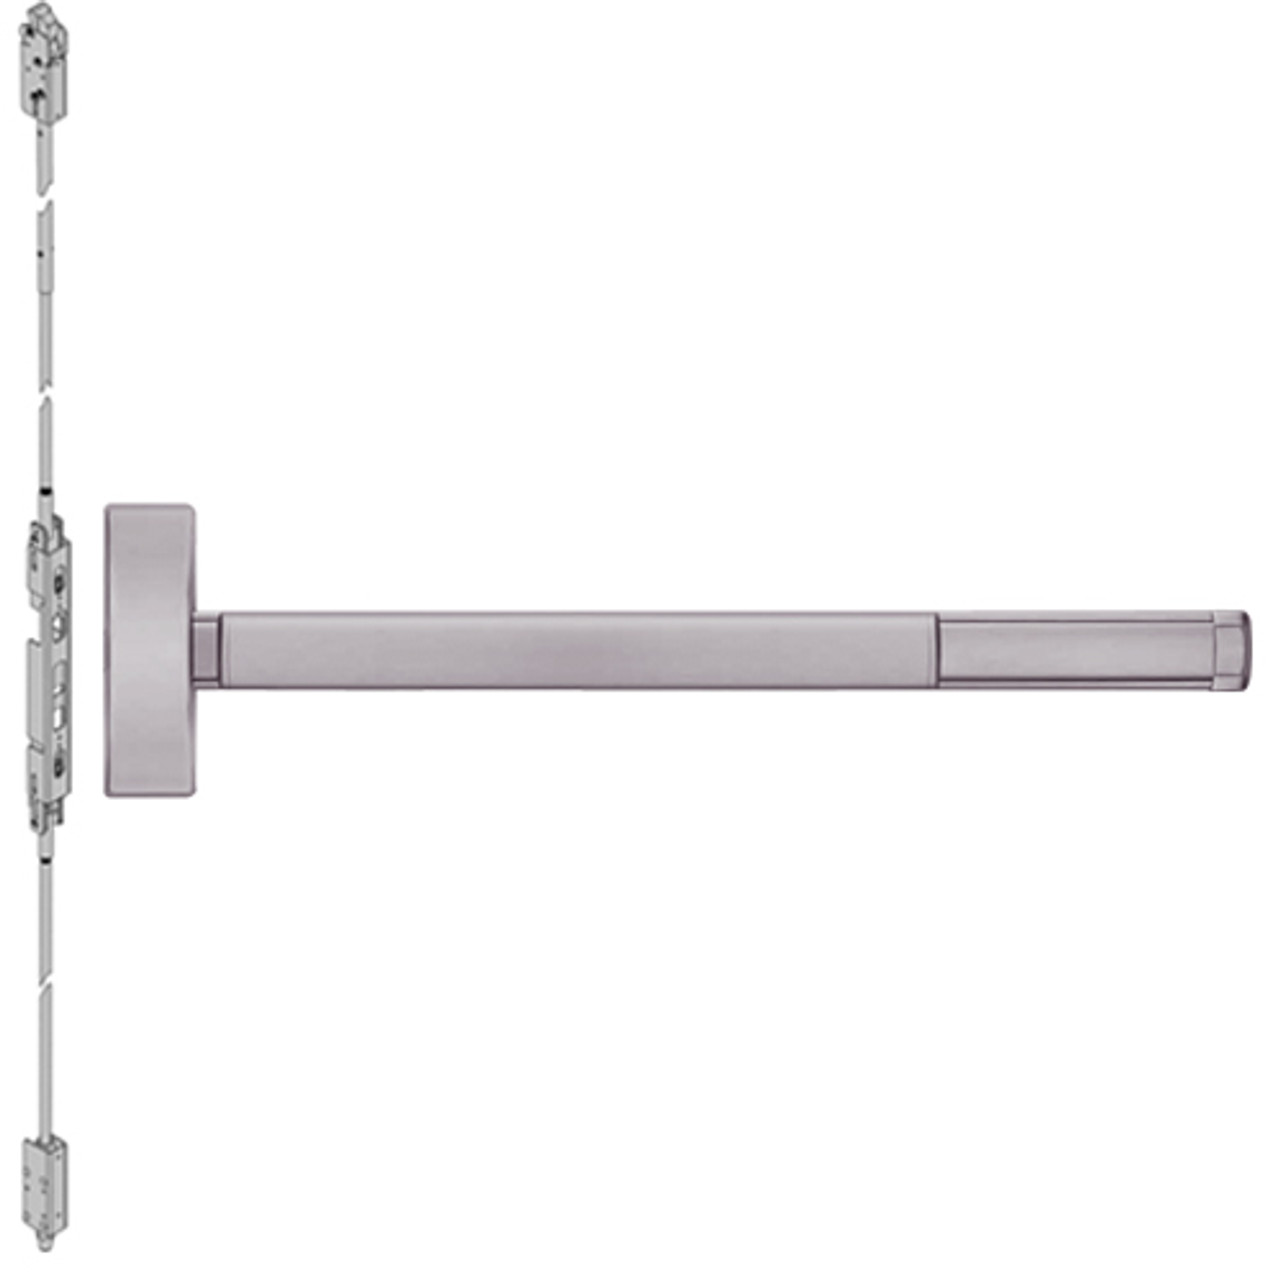 TS2801LBR-630-36 PHI 2800 Series Concealed Vertical Rod Exit Device with Touchbar Monitoring Switch Prepped for Cover Plate in Satin Stainless Steel Finish